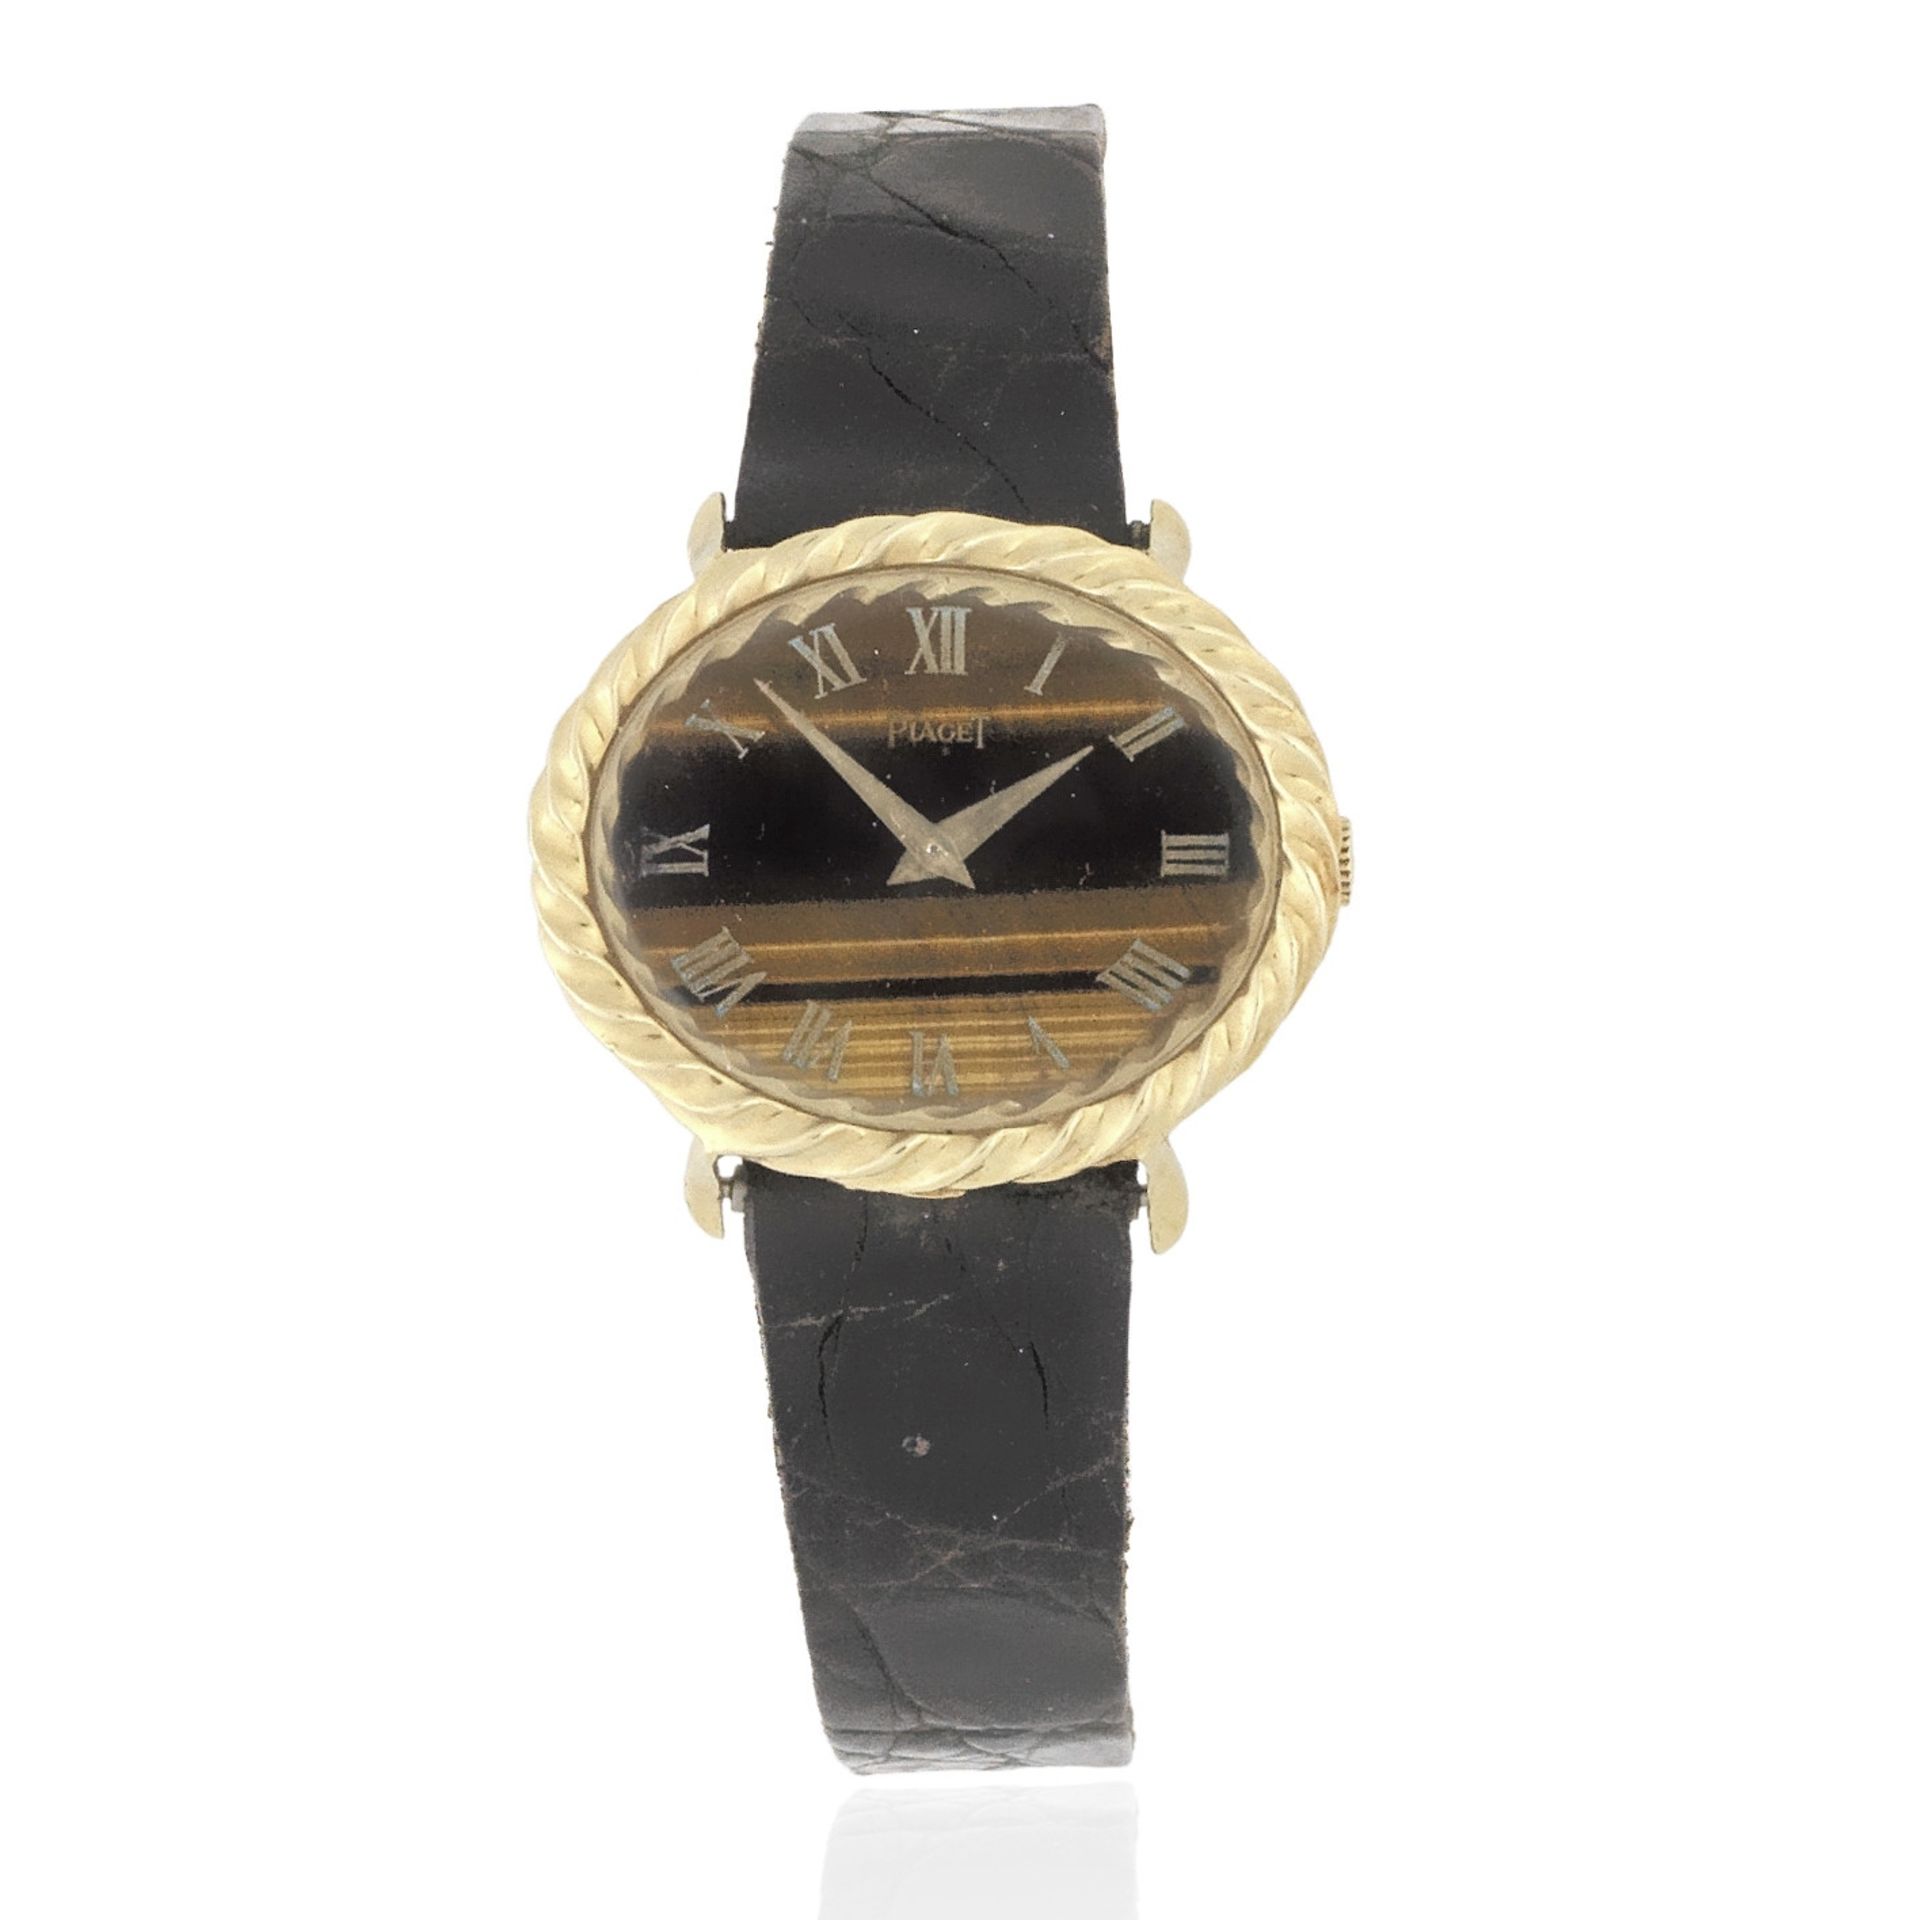 Piaget. A lady's 18K gold manual wind oval wristwatch with tiger's eye dial Ref: 9803, Circa 1980